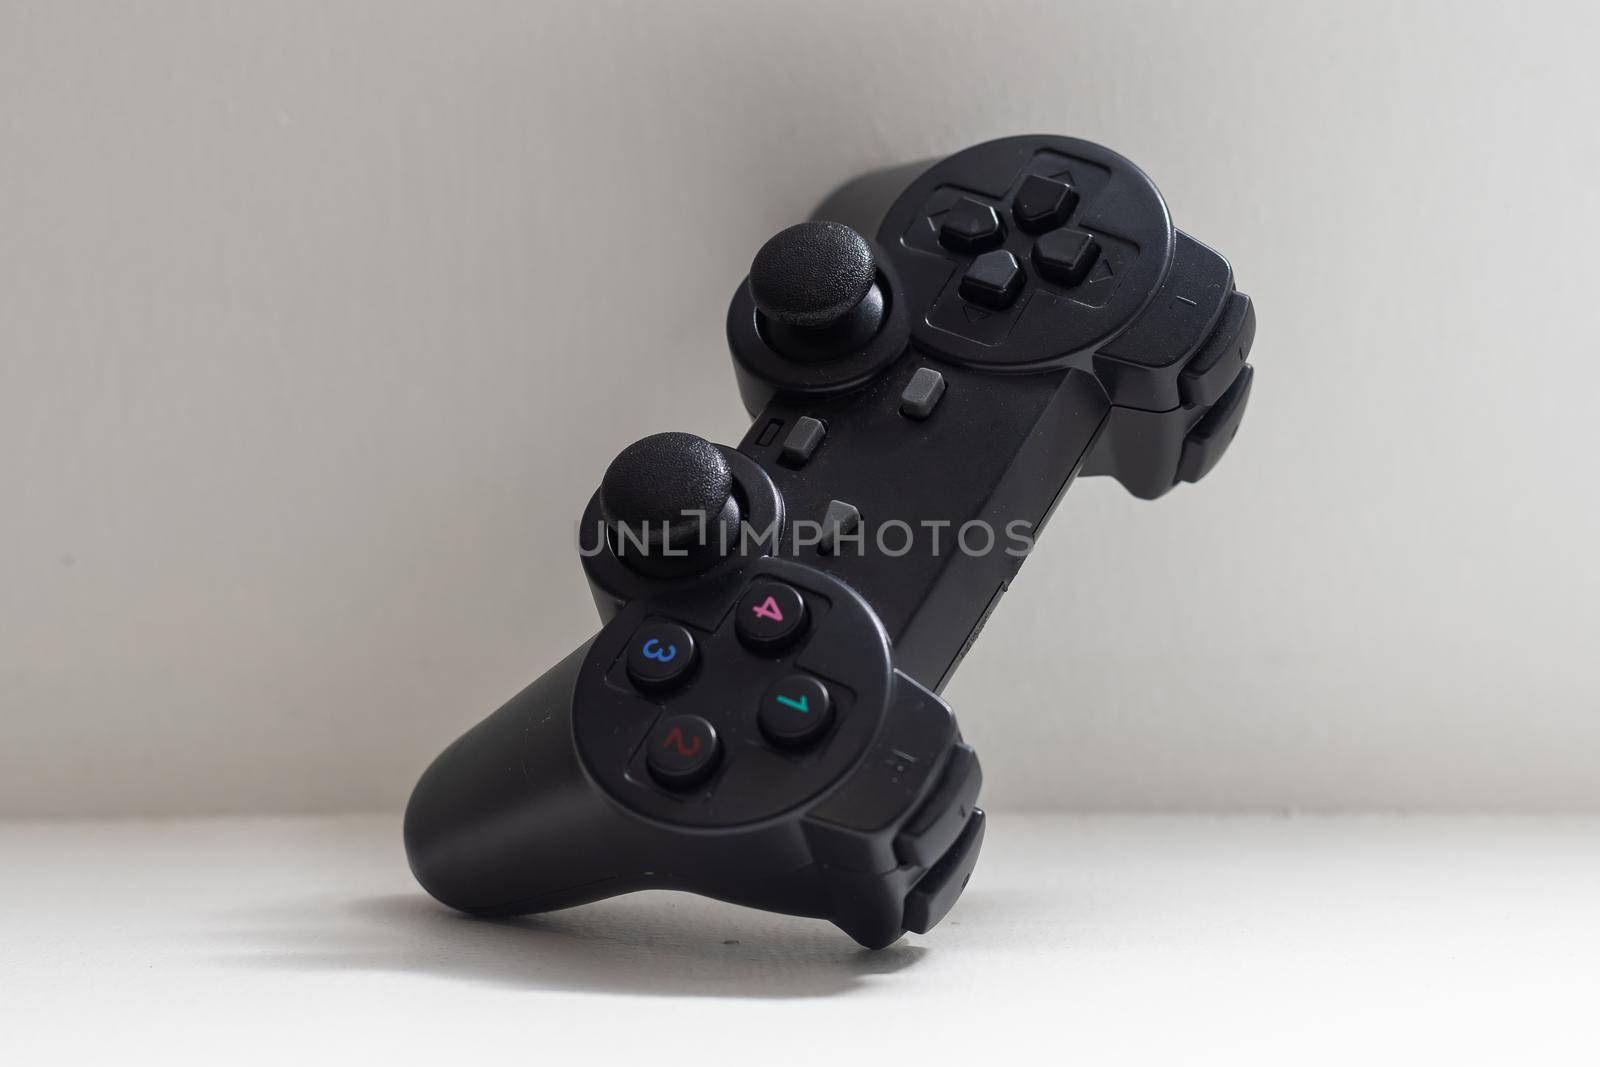 joystick for the game on white background.